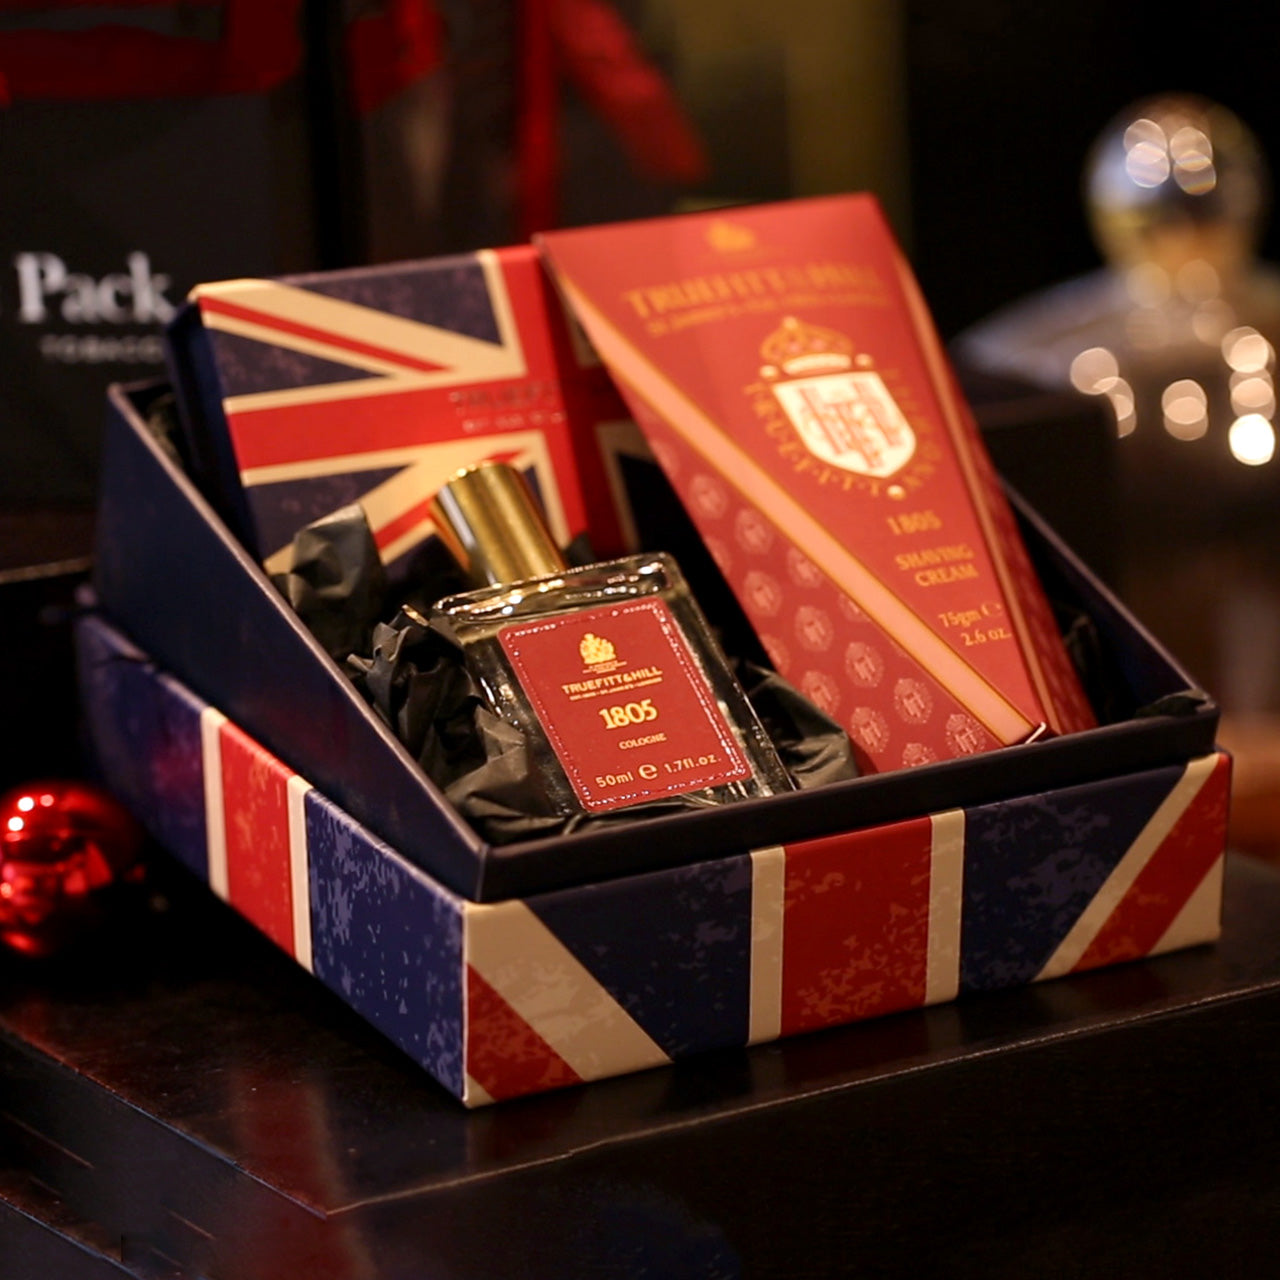 Giftbox covered in the Union-Jack containing 1805 Cologne, 1805 Shaving Cream and the Truefitt & Hill Keyring